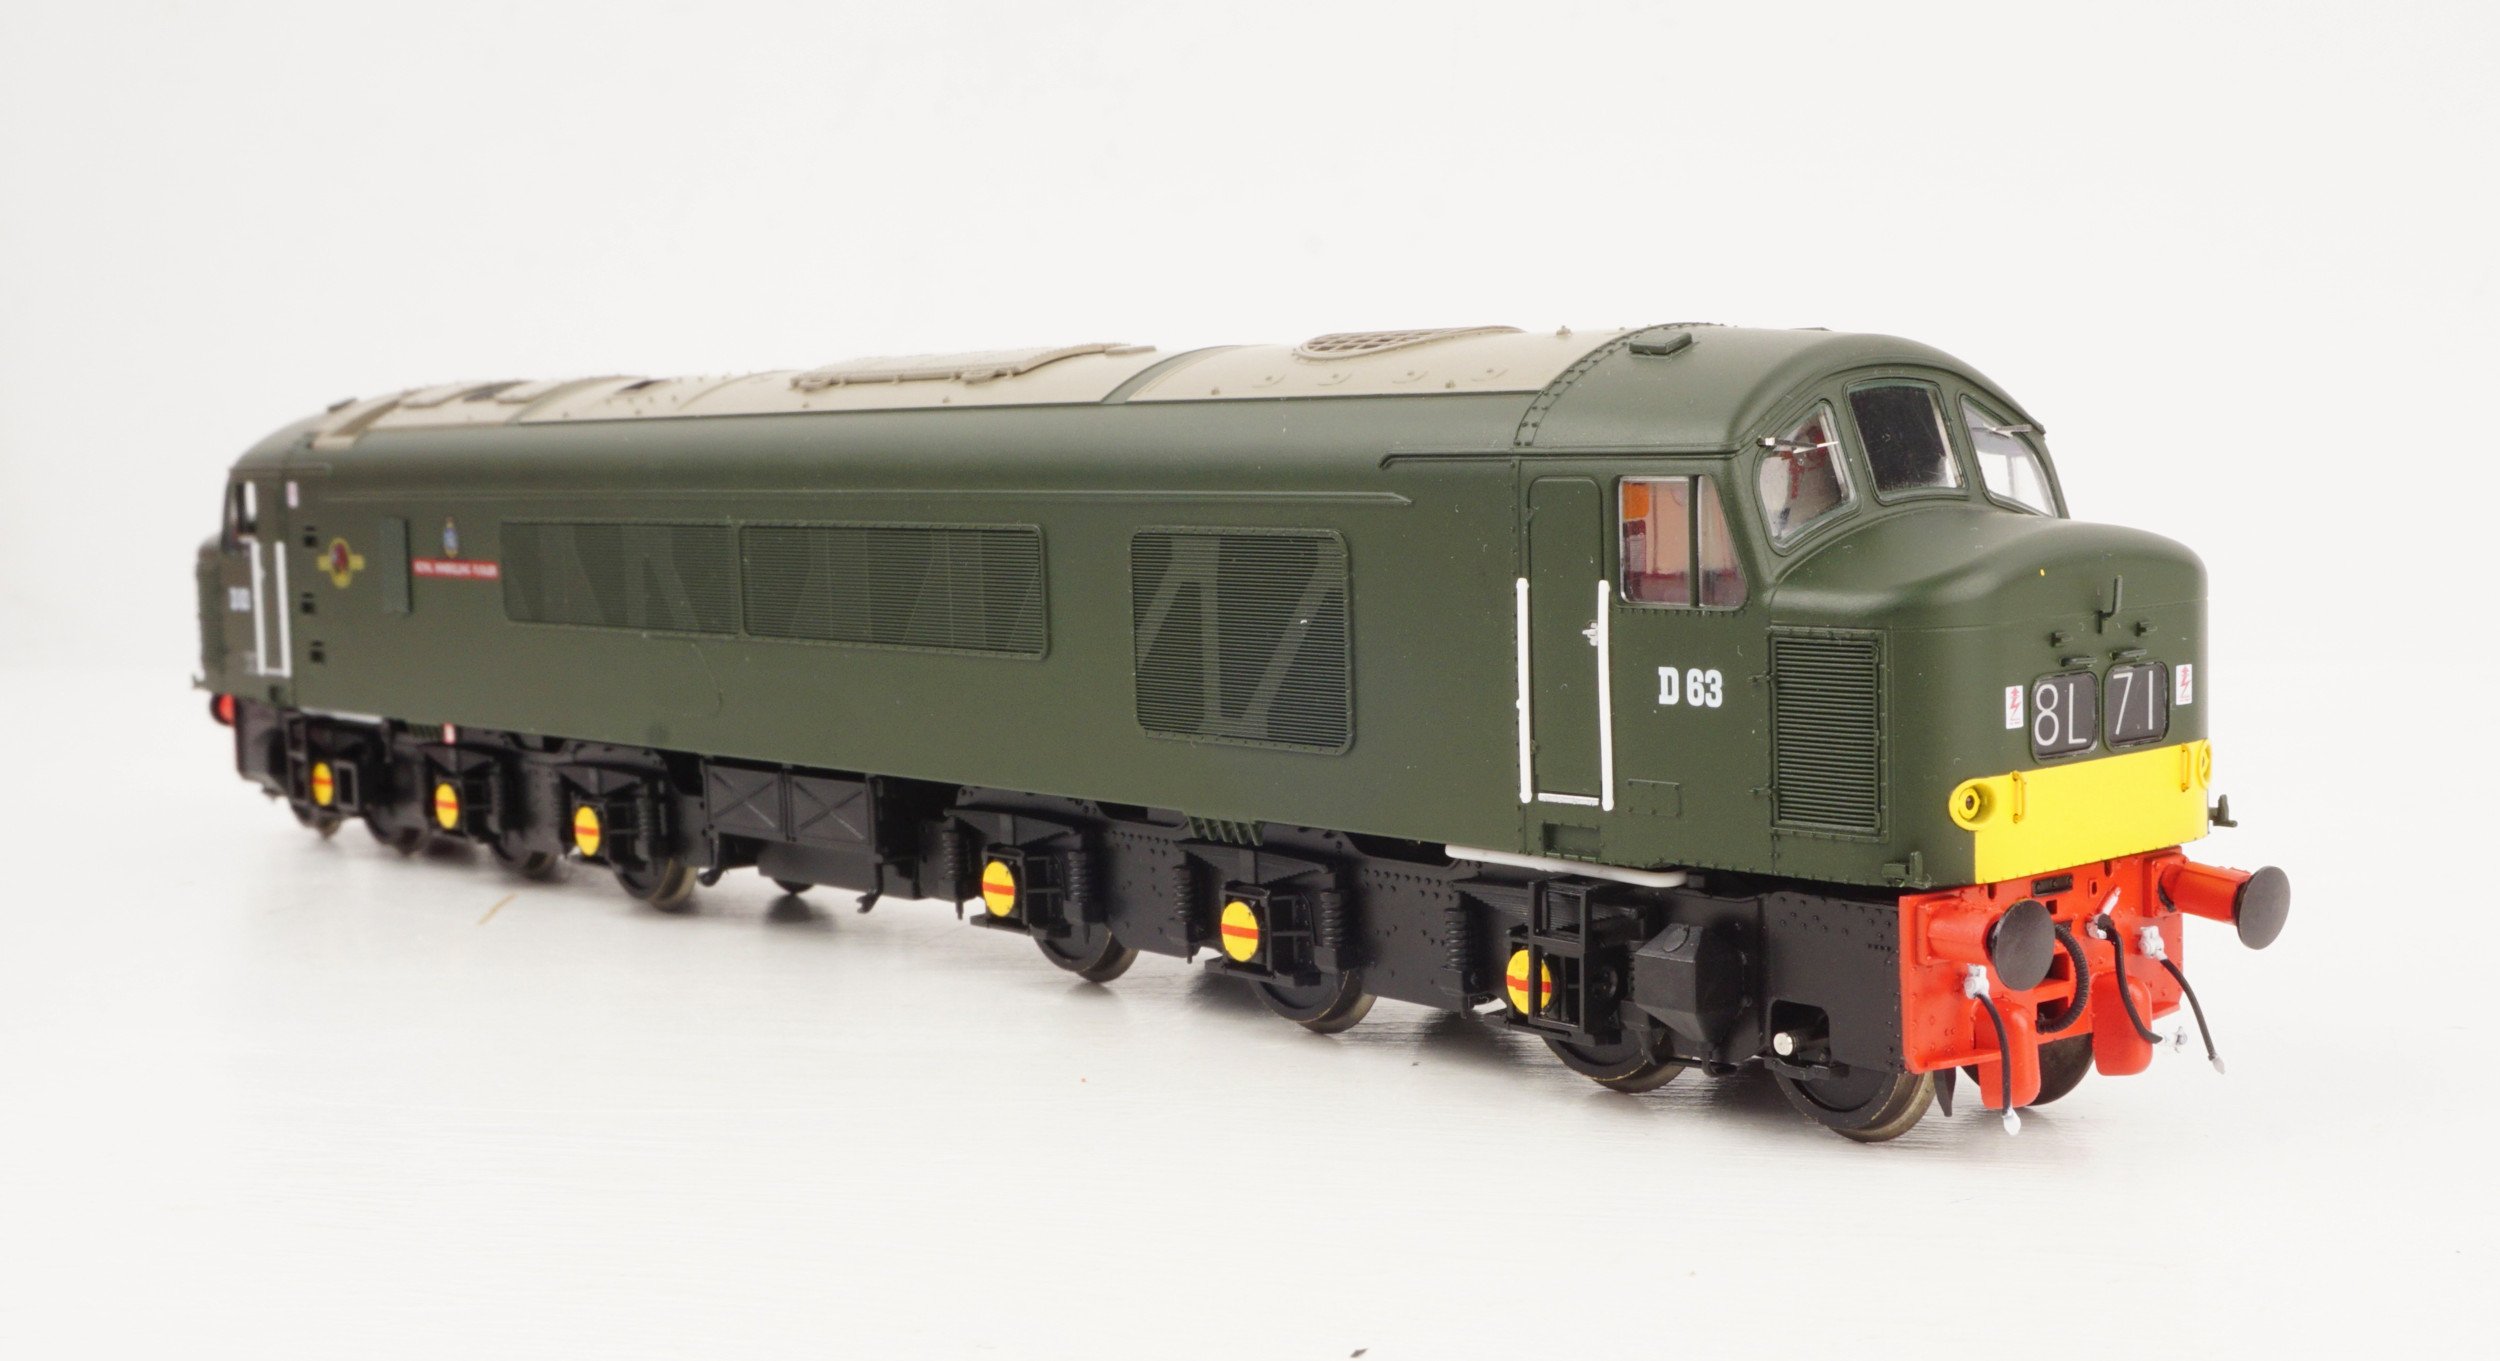 Heljan's new Class 45 is set to appear in BR economy green.